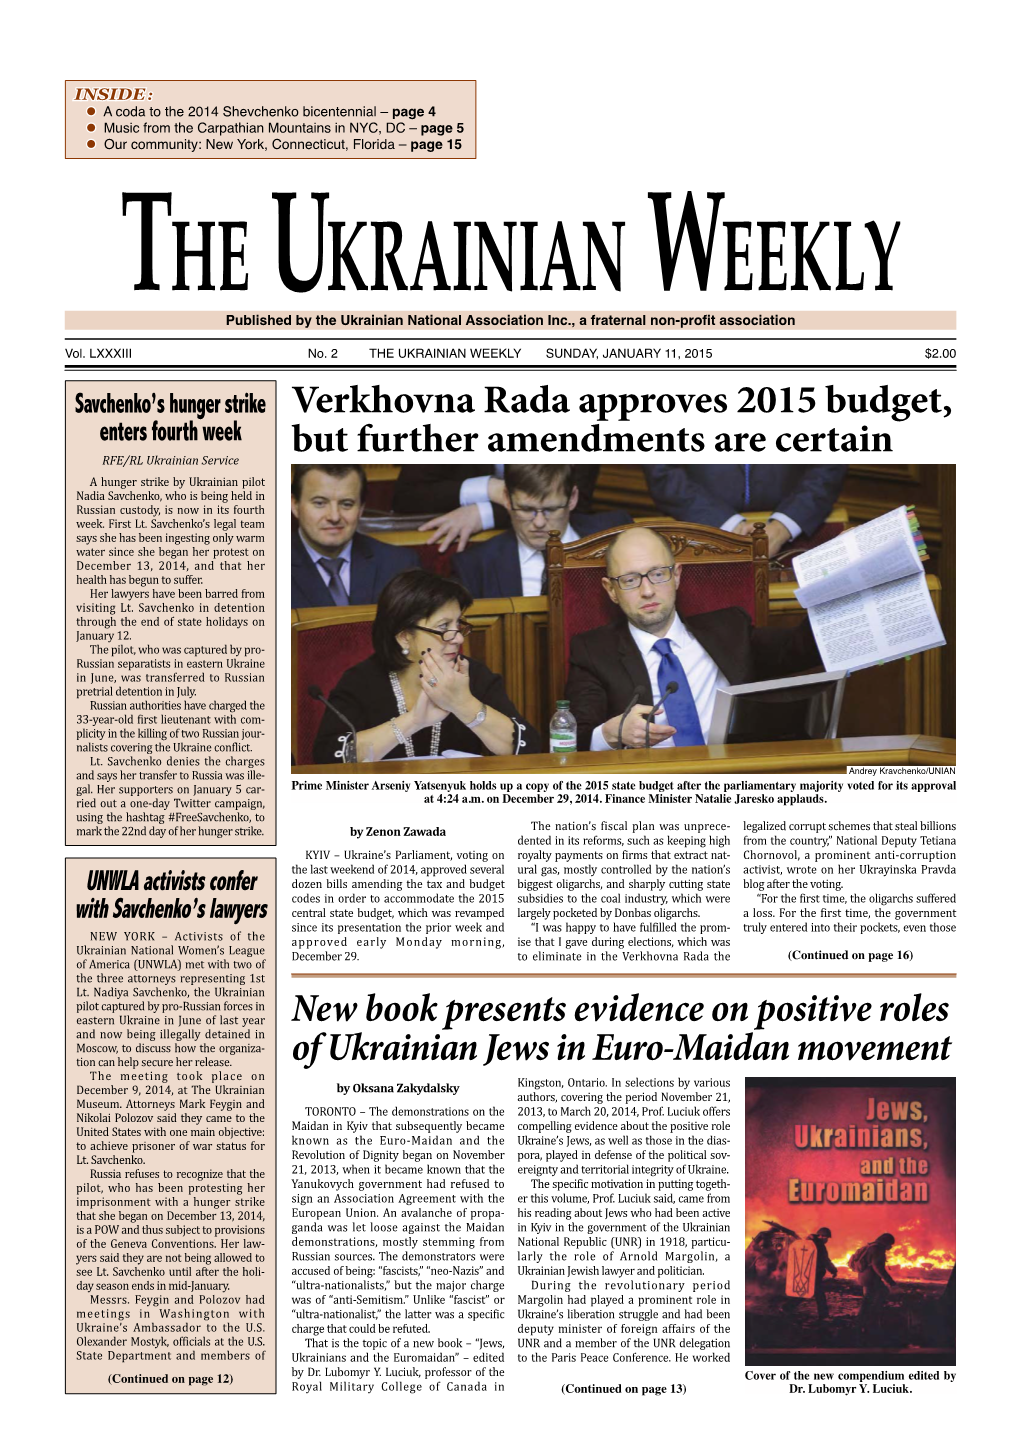 Verkhovna Rada Approves 2015 Budget, but Further Amendments Are Certain New Book Presents Evidence on Positive Roles of Ukrainia